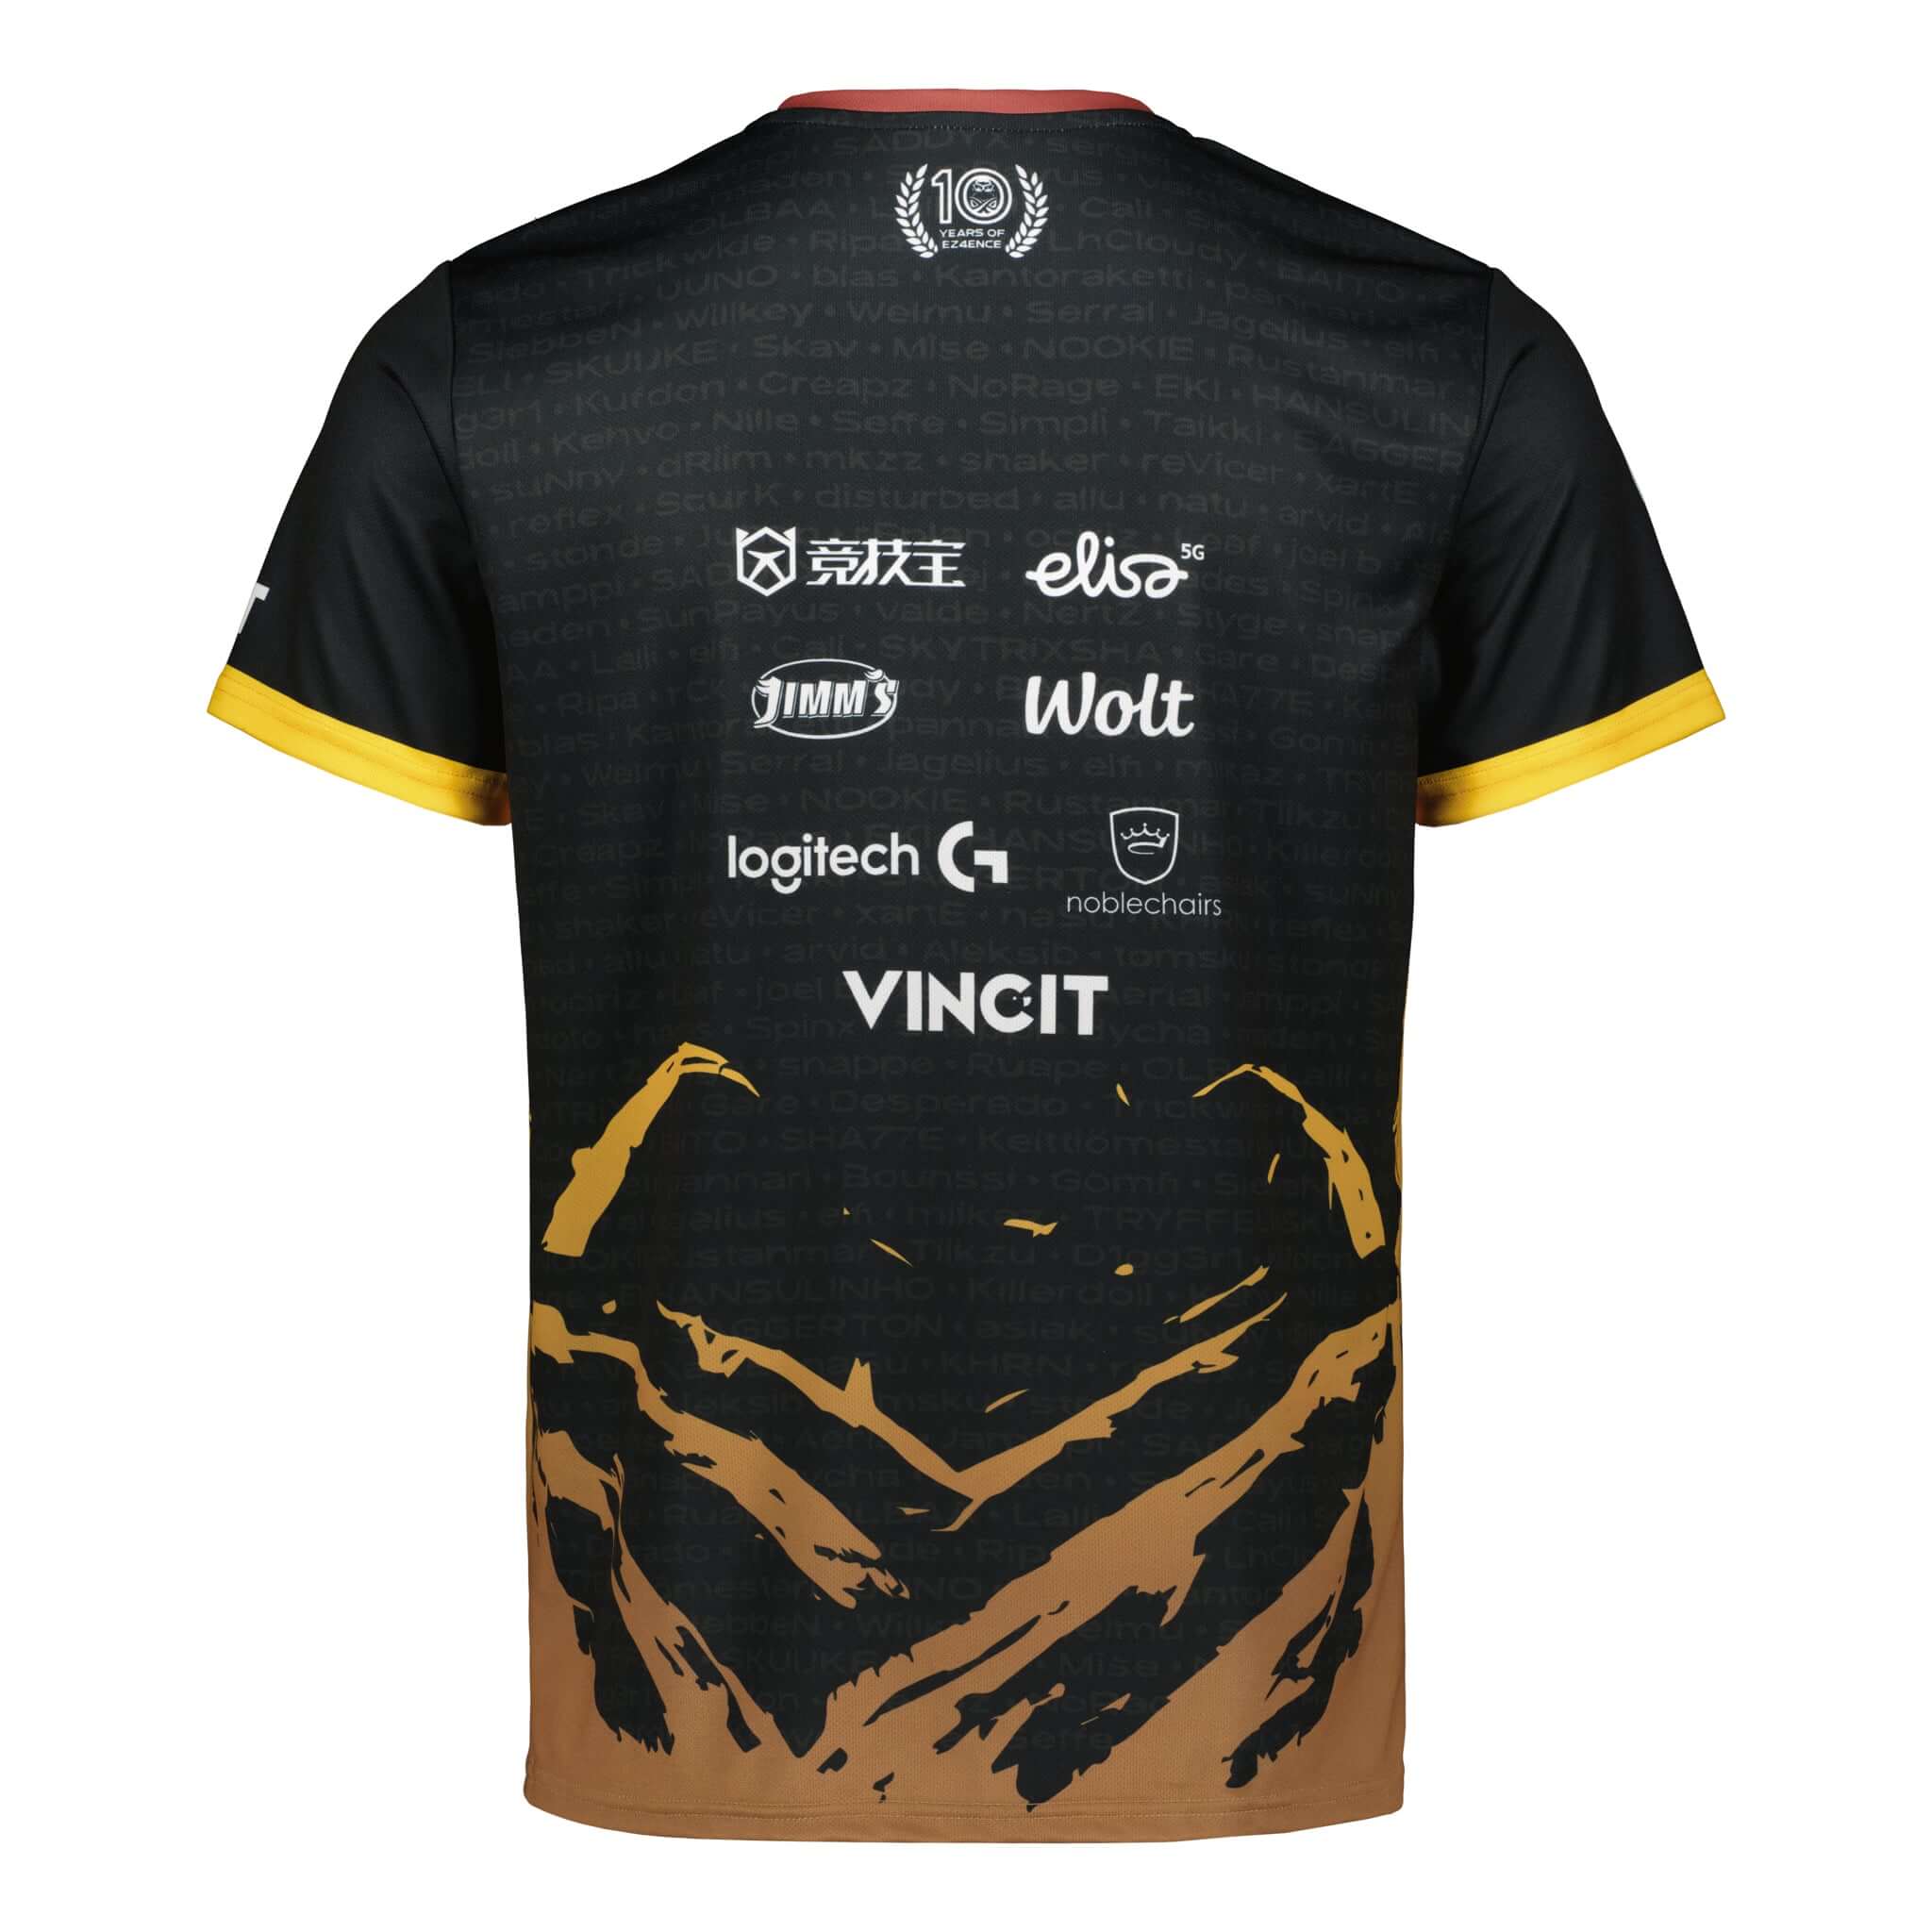 ENCE 10th Anniversary Edition Jersey | ENCE Shop